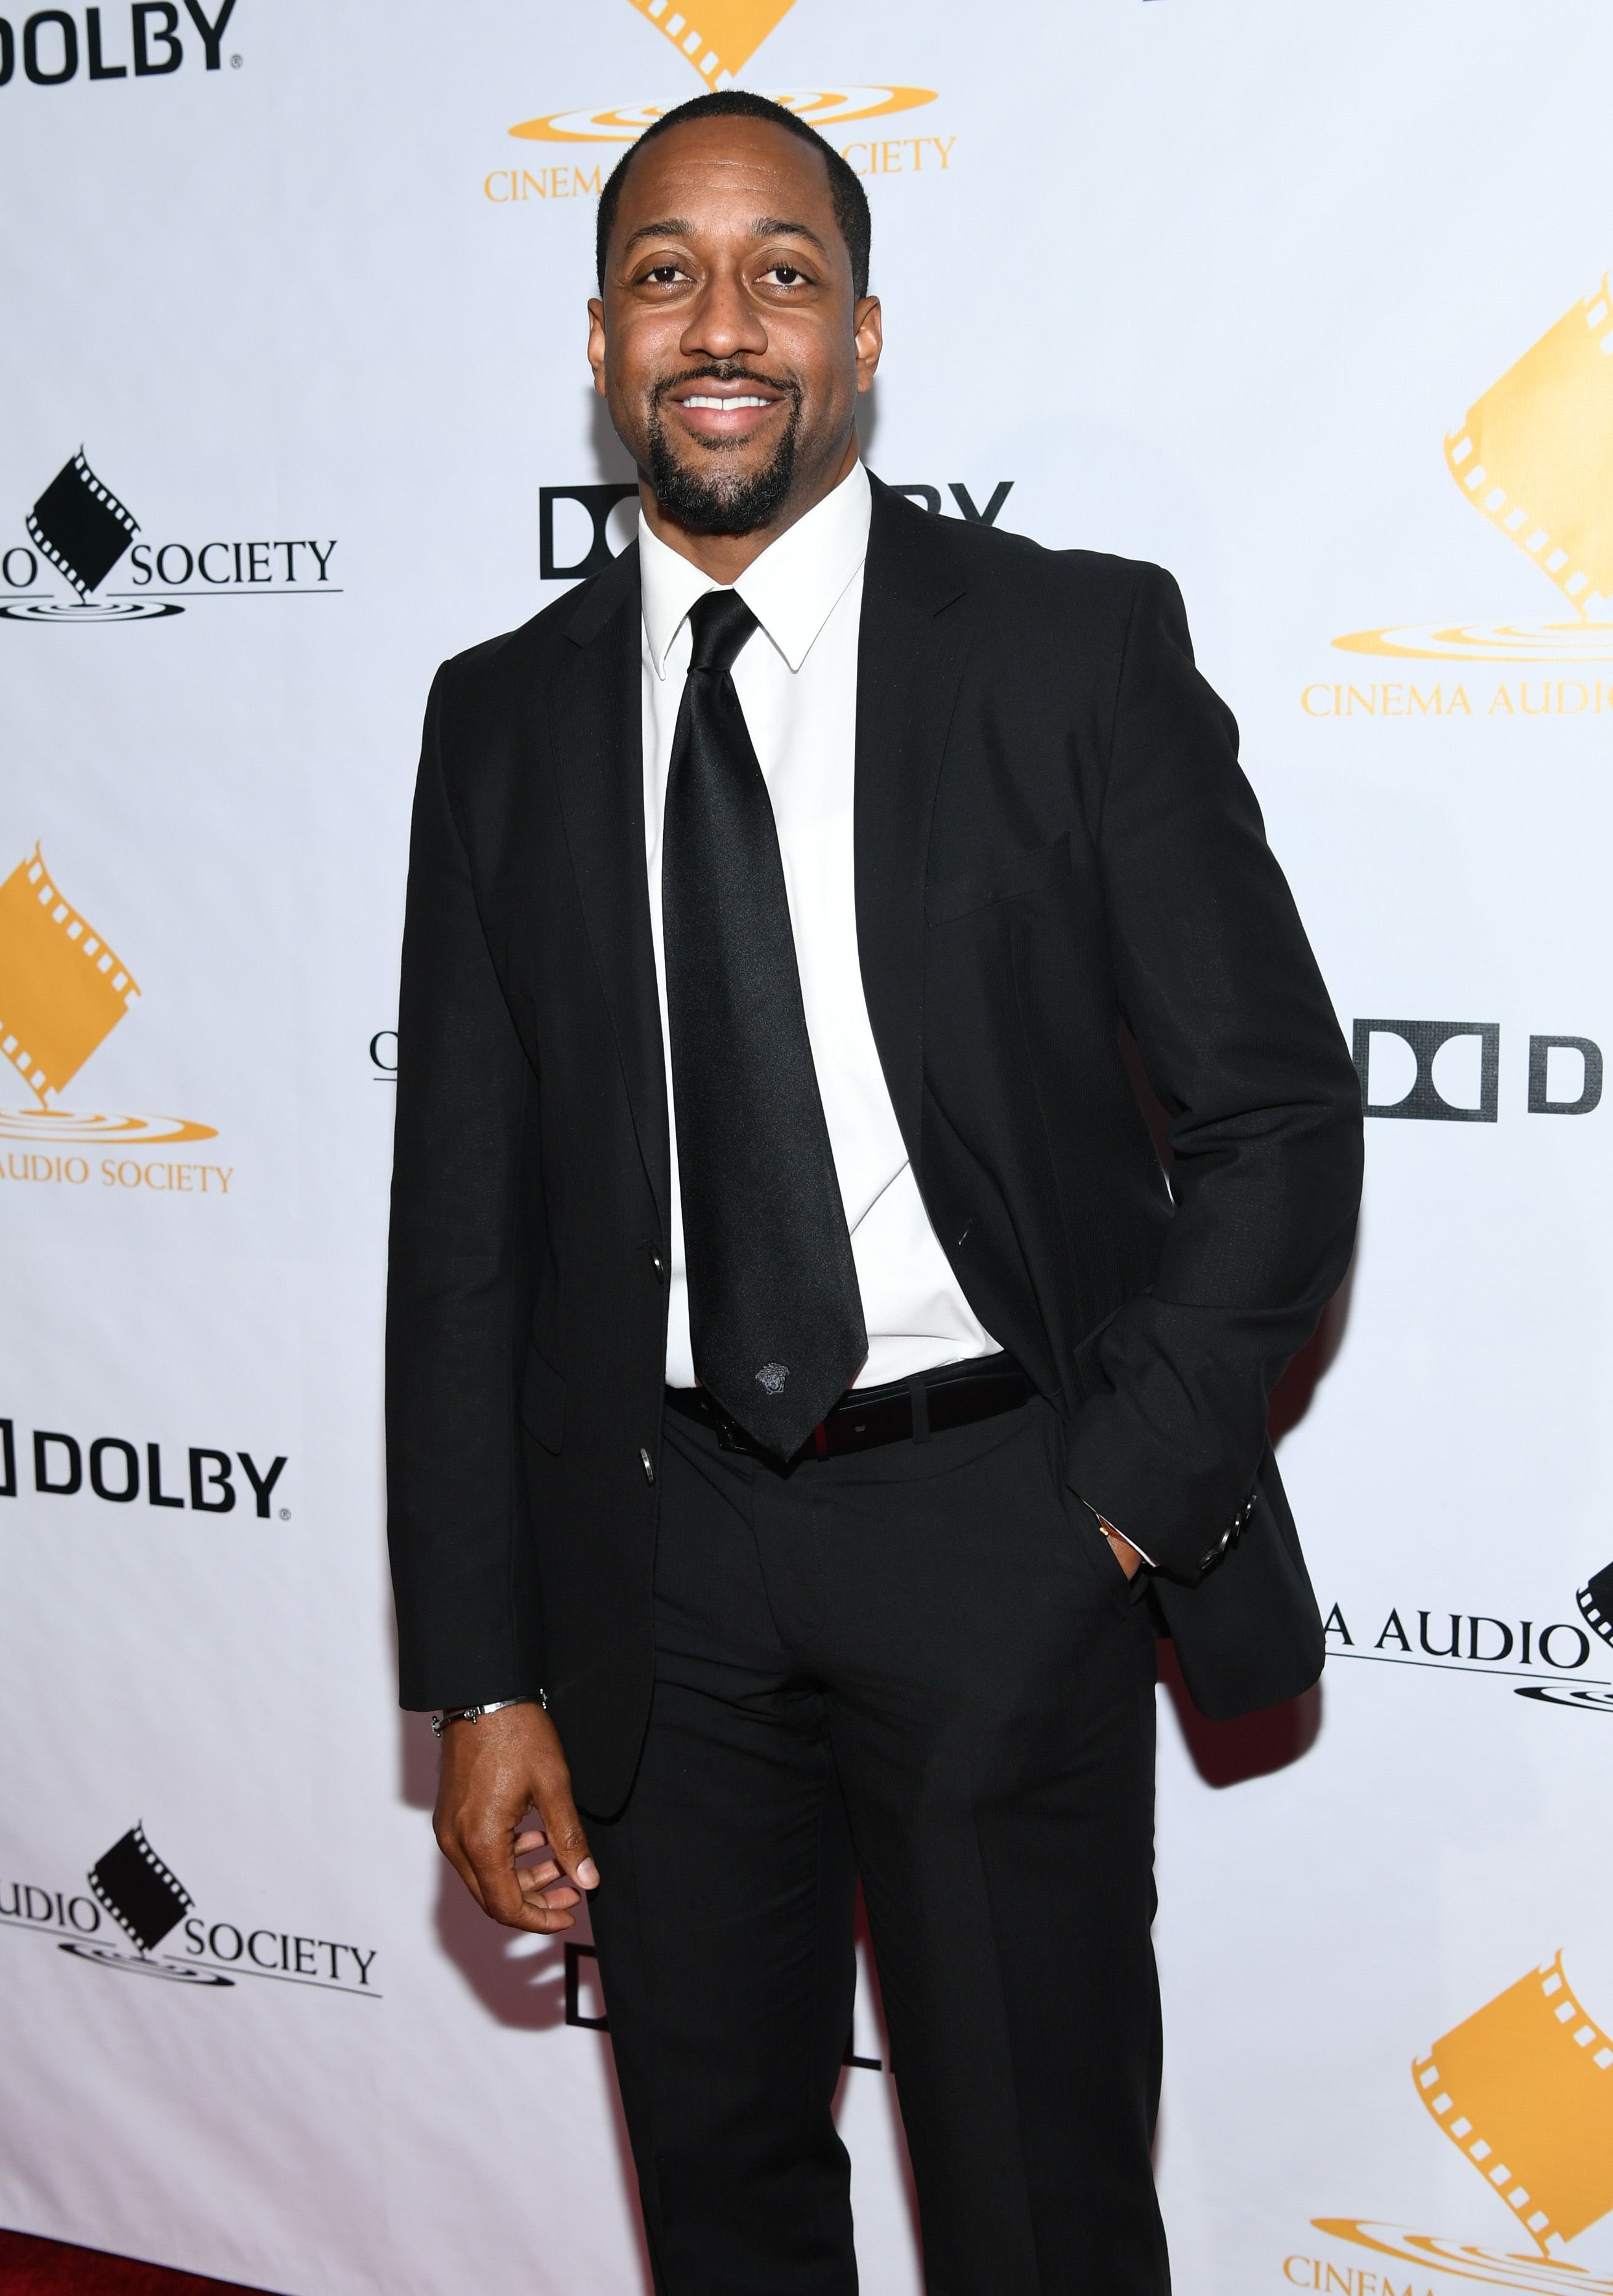 Jaleel White at the annual Cinema Audio Society on February 24, 2018 in Los Angeles. | Photo: Getty Images